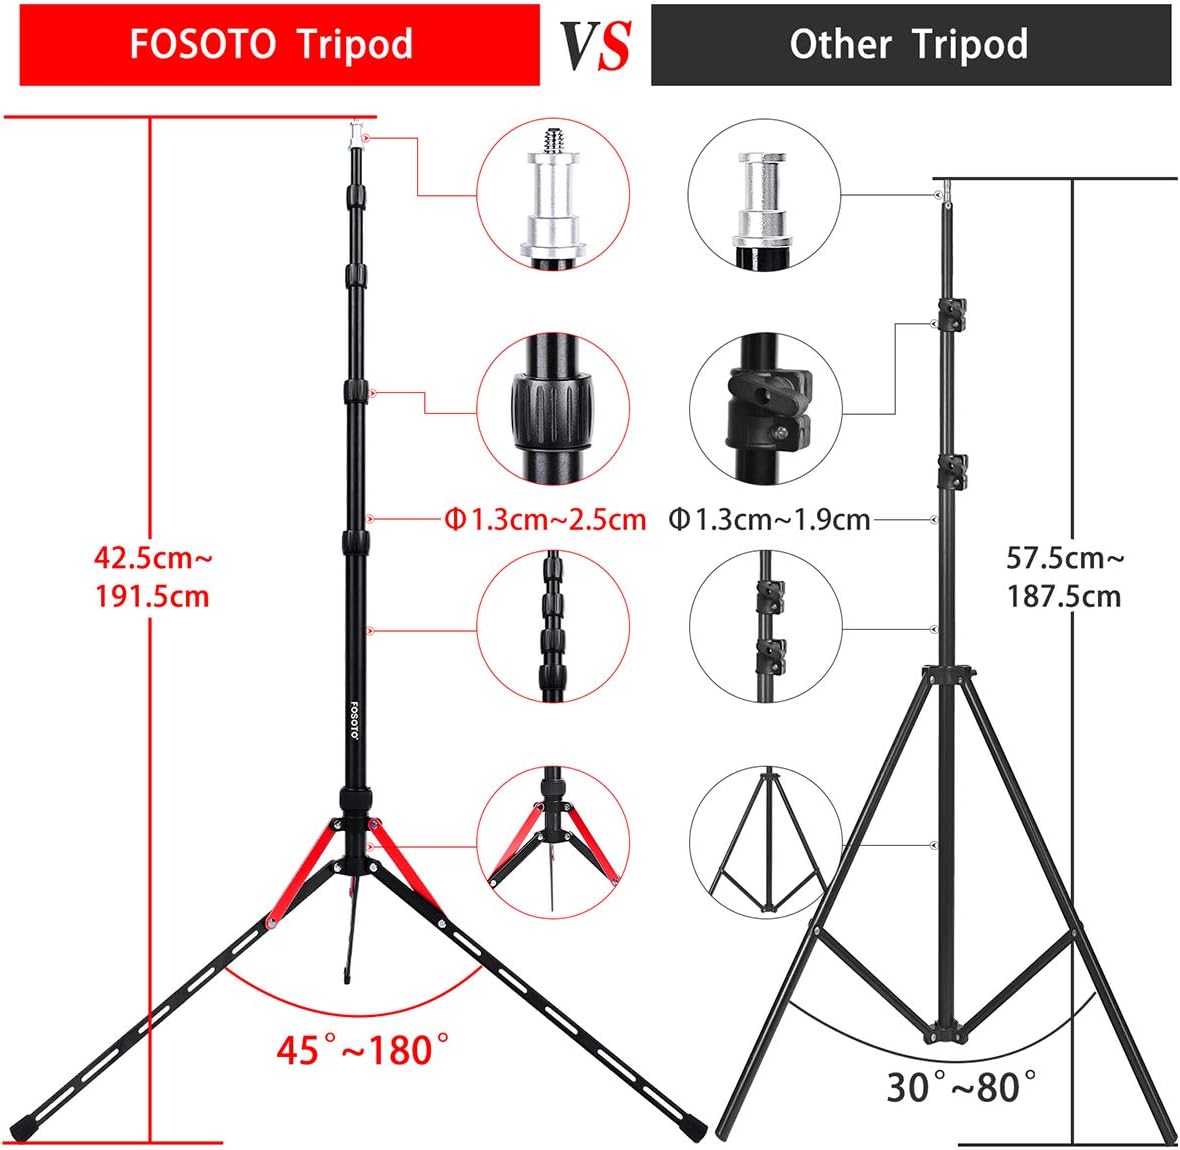 FOSOTO Photography Tripod Stand 6.3 Feet Aluminum Alloy Light Stand Compatible for Digital Cameras Photo Studio Speedlight Ring Light Reflector Samll Softbox Flash Umbrella Lightstand with 1/4 Screw